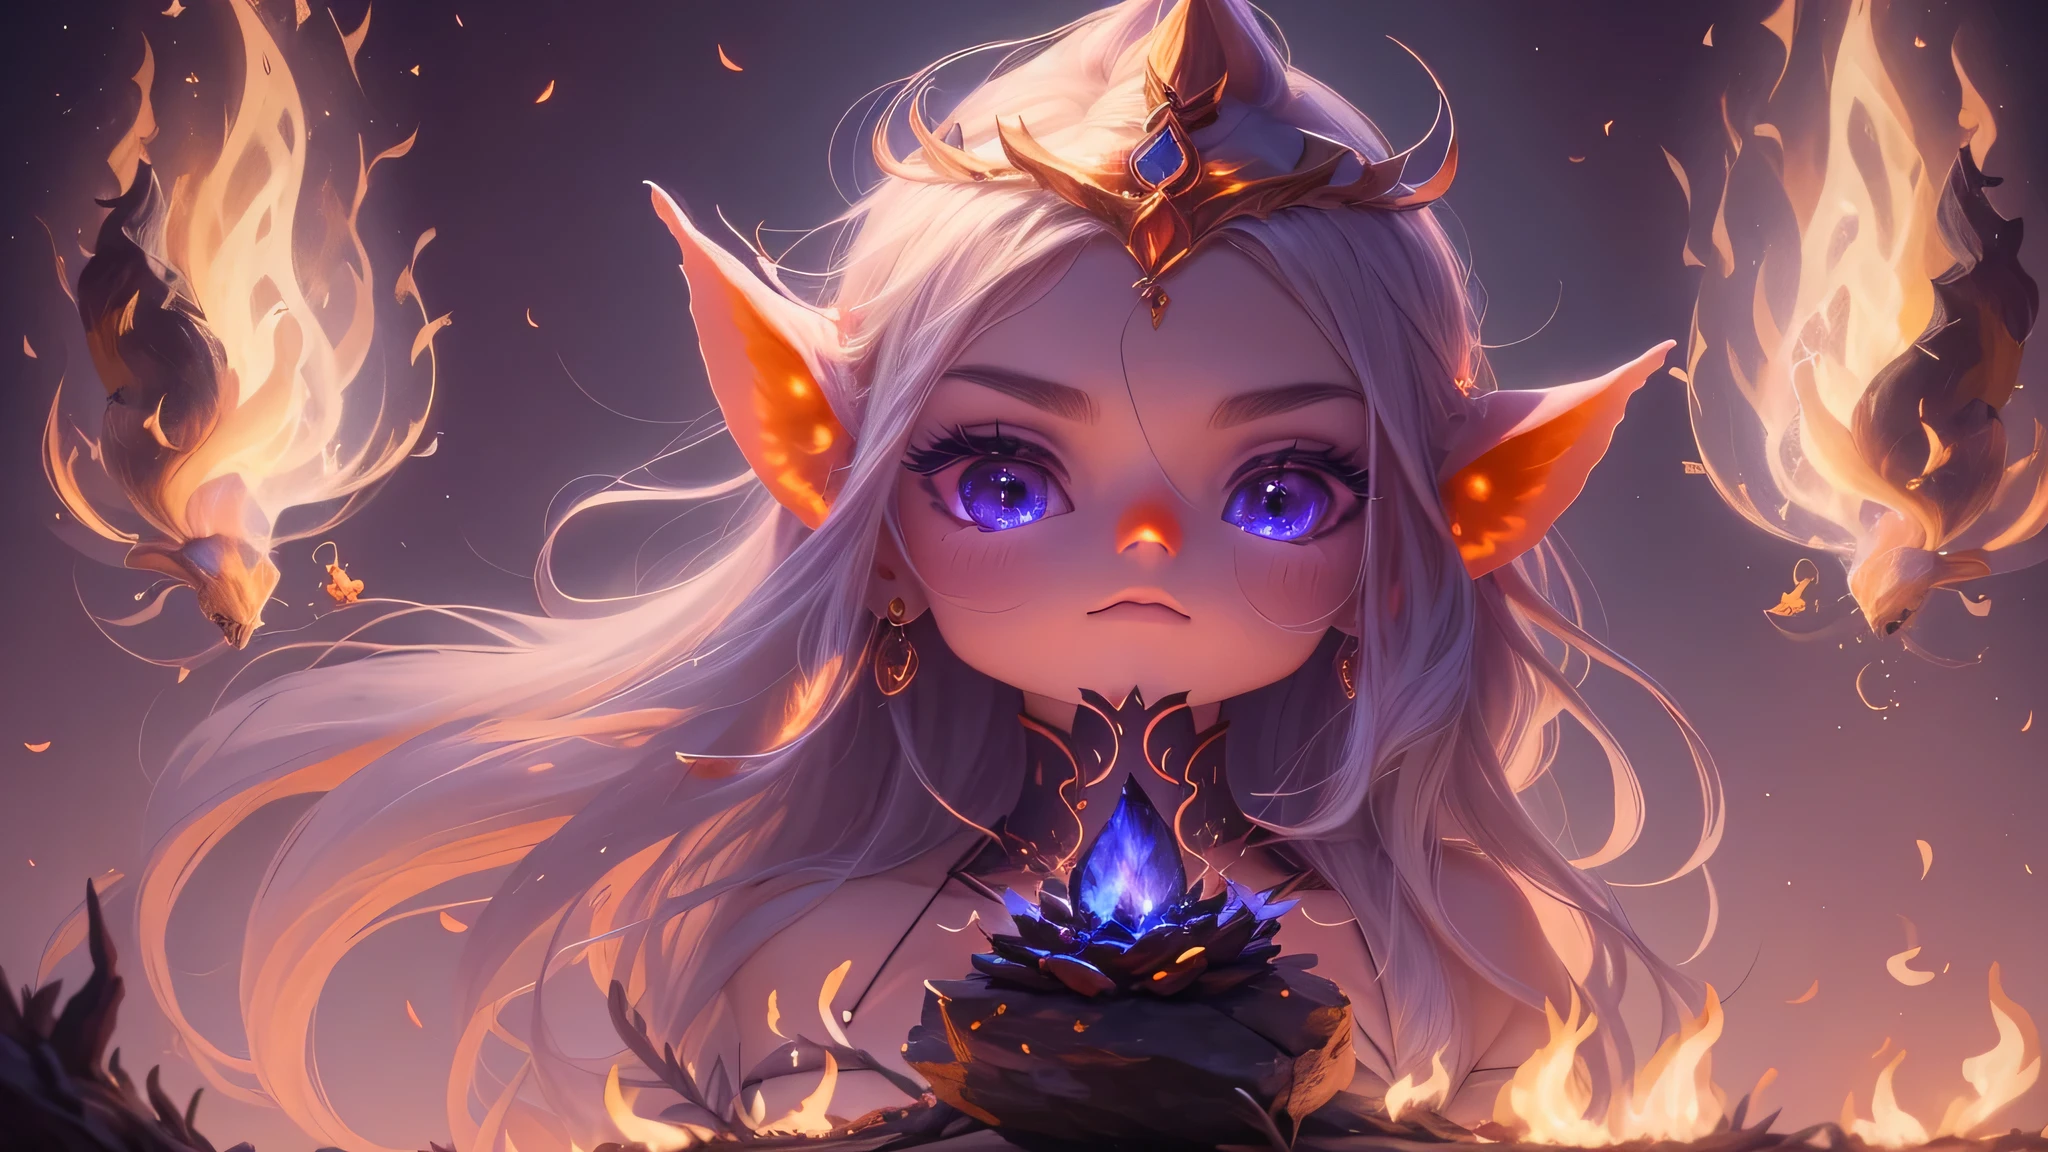 （（shot from a far distance）），（Shadow elf decorated with streamers and fireflies），（（Bonfires and shining ores on dark nights&Wind blowing effect&floating flames）），（girl），（soft light lighting），official art，（wallpaper design）